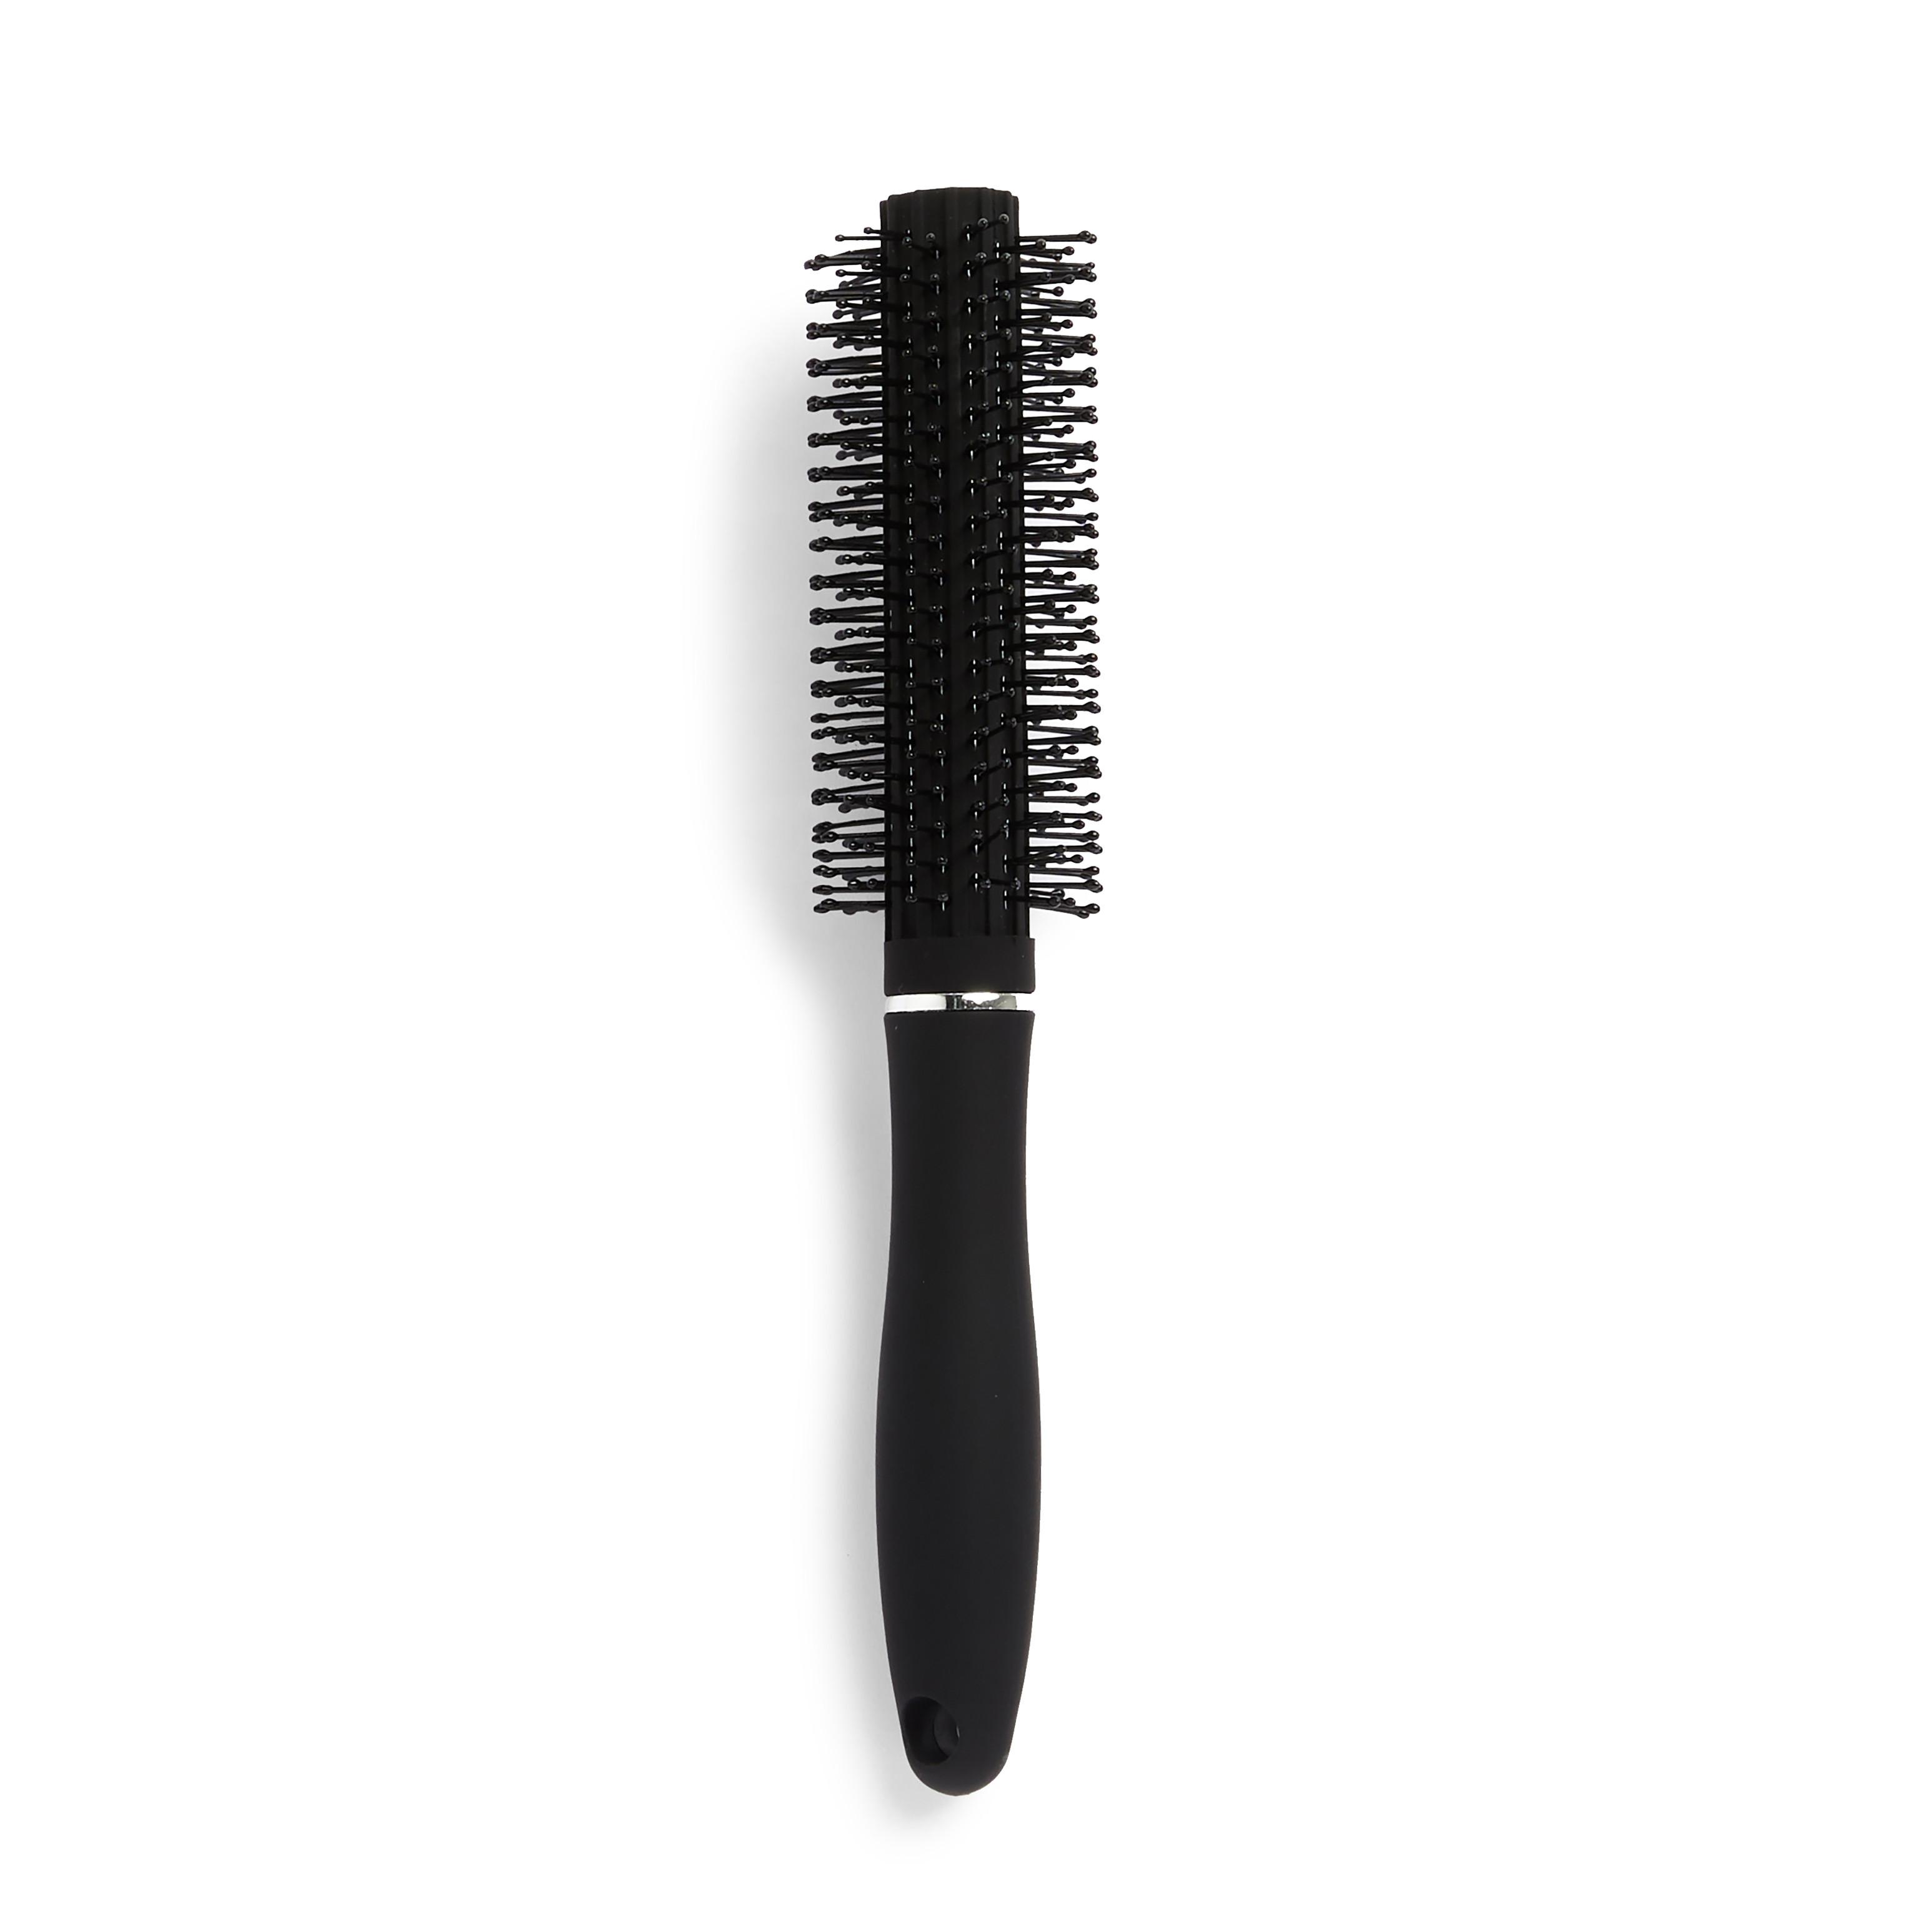 Black Round Hairbrush Makeup Brushes Blenders Makeup Tools Brushes Curlers More Beauty Accessories Makeup Cosmetics All Primark Products Primark Uk